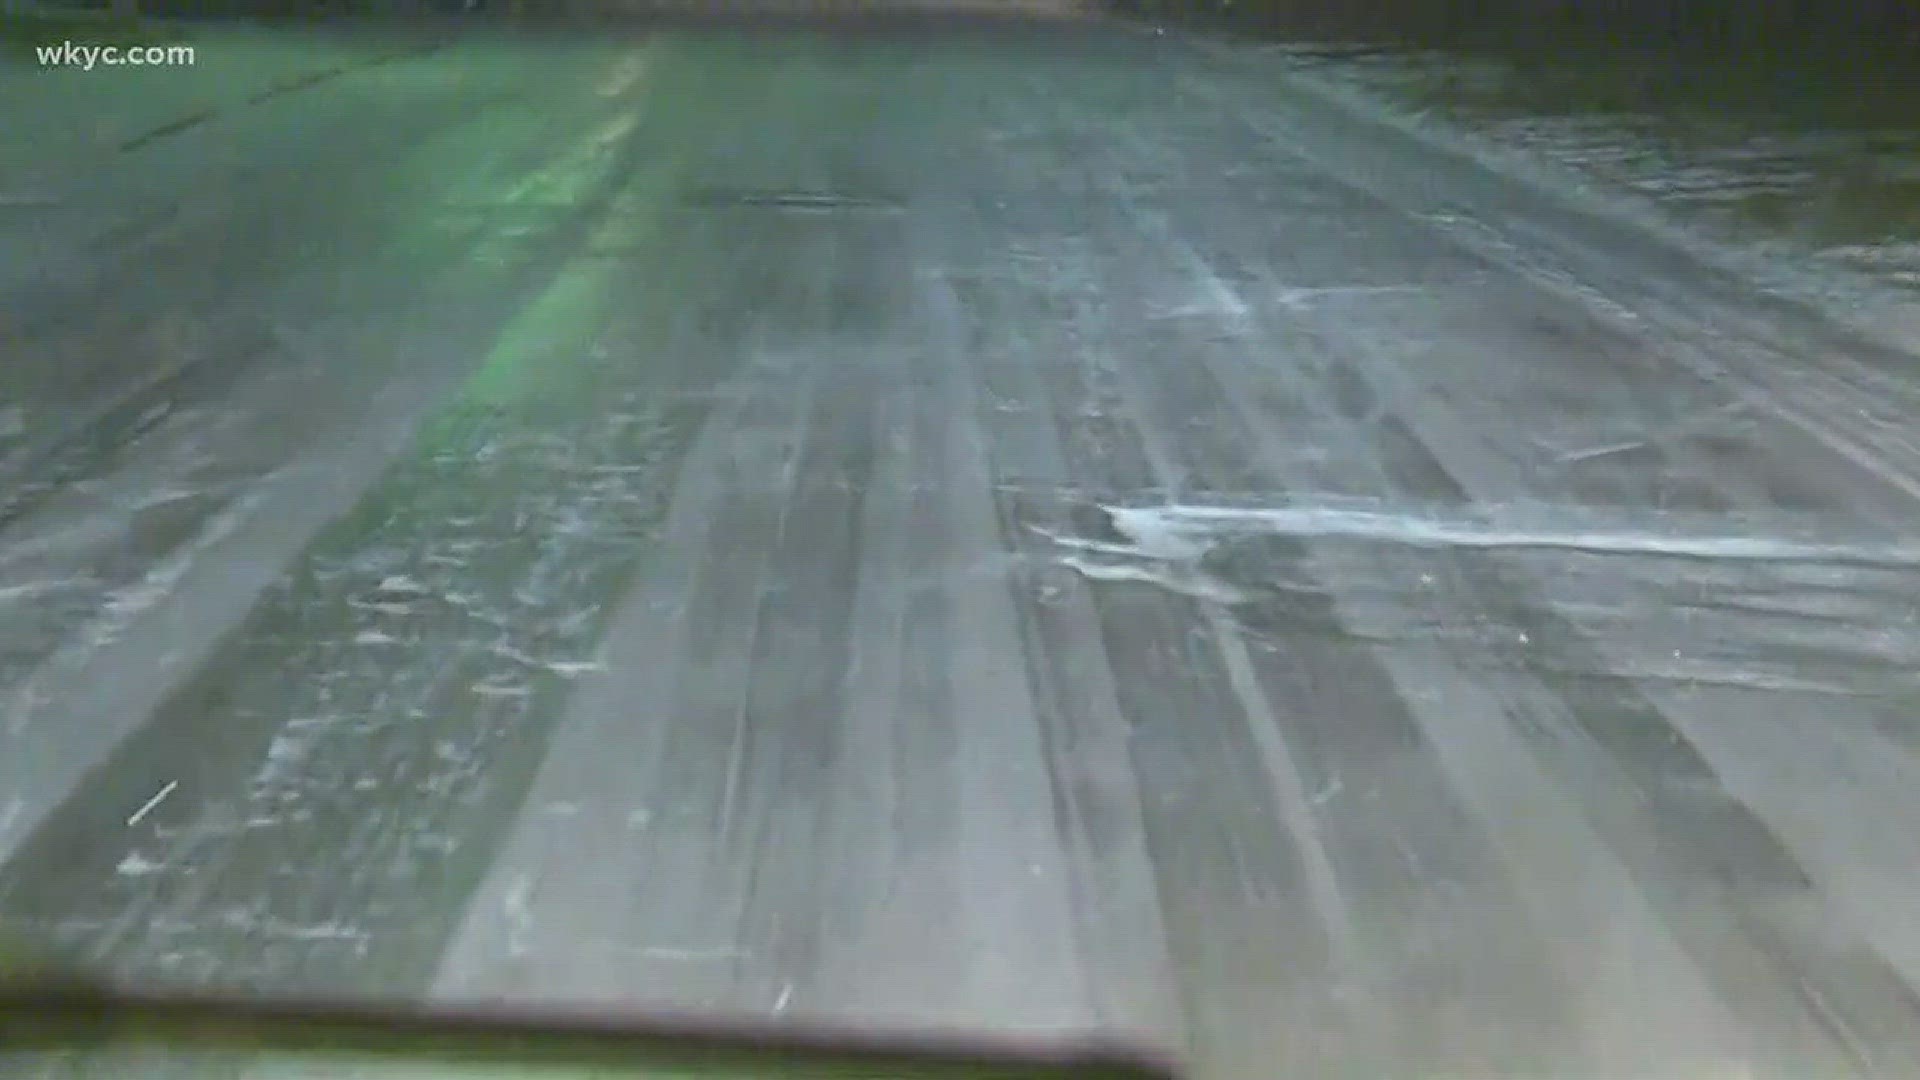 Icy conditions are impacting side streets as WKYC's Tiffany Tarpley showed us this morning.